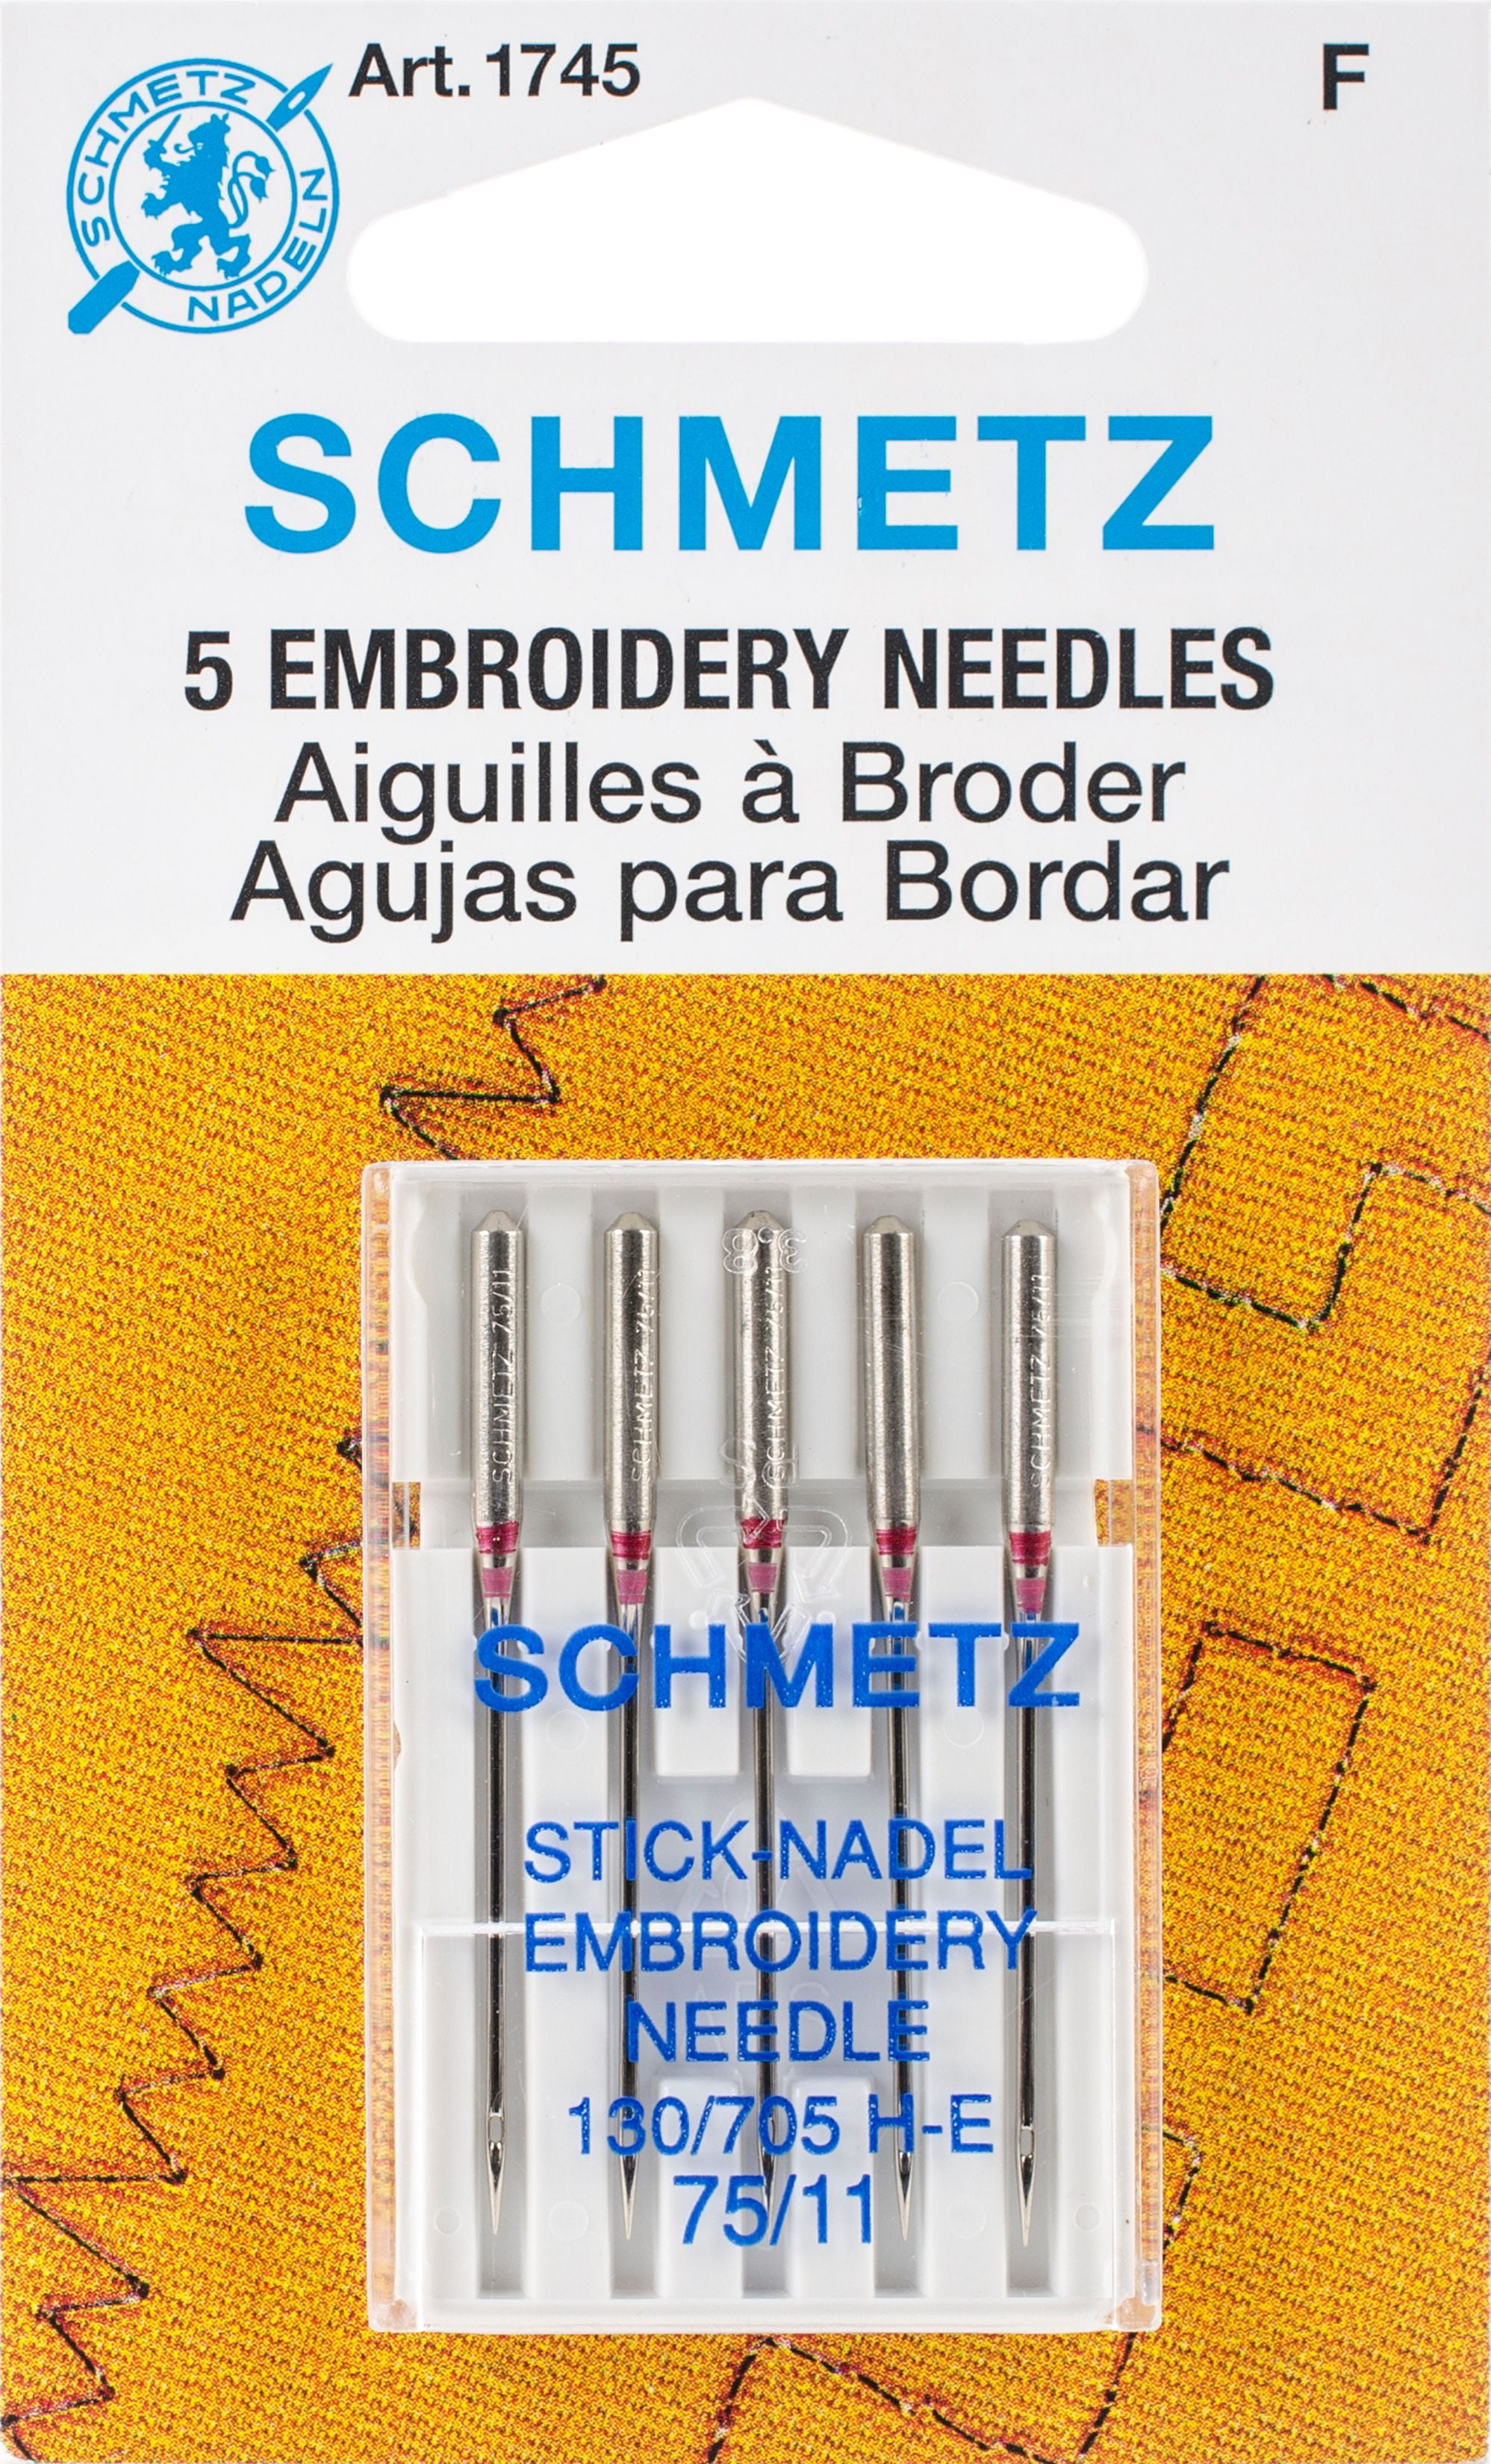 4 Pack of 10 Needles 40 Pcs Embroidery Sewing Machine Needles Size 75/11 80/12 90/14 100/16 HAx1 Sewing Needles by STARVAST for Brother Singer Sewing Machine 